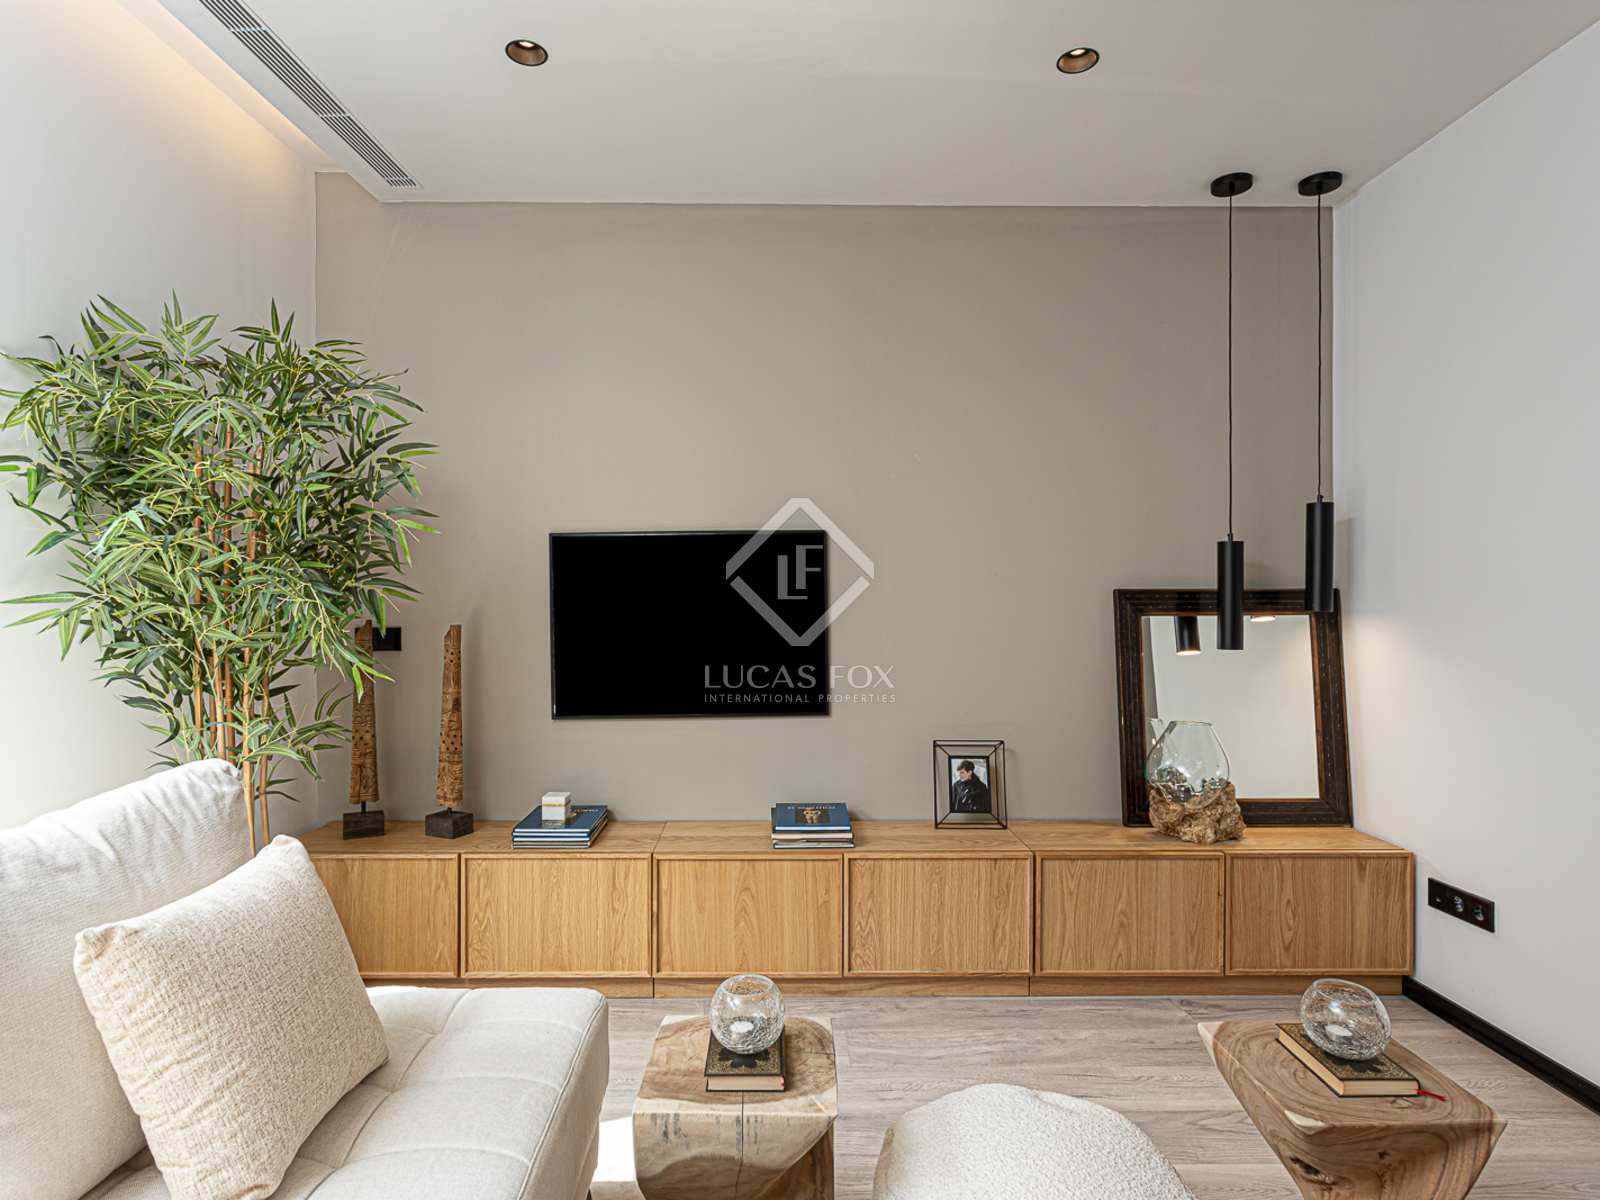 Living room : Some unit images shown are computer generated or indicative only